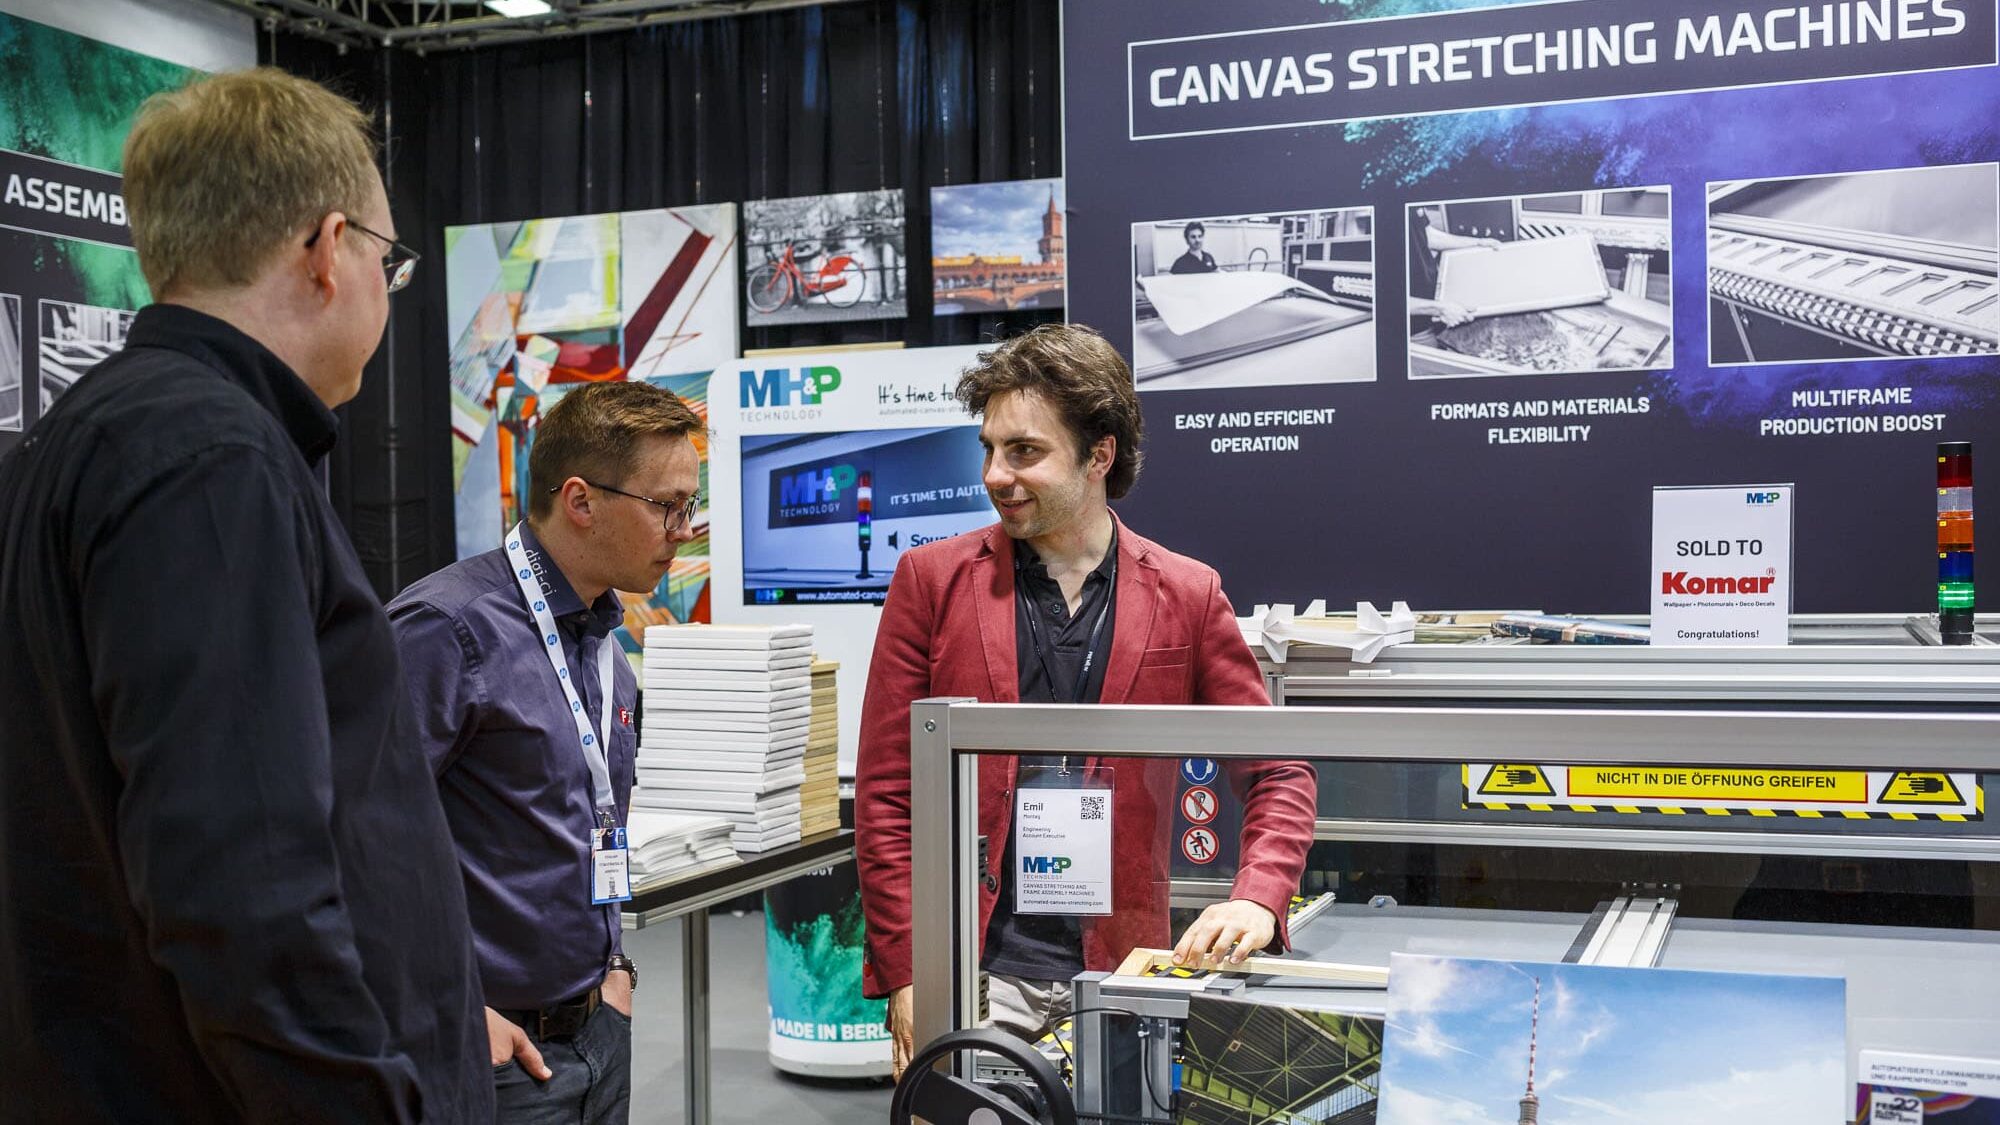 Demonstrations with the MHP Canvas Stretching Machine STMaster at Fespa 2022.